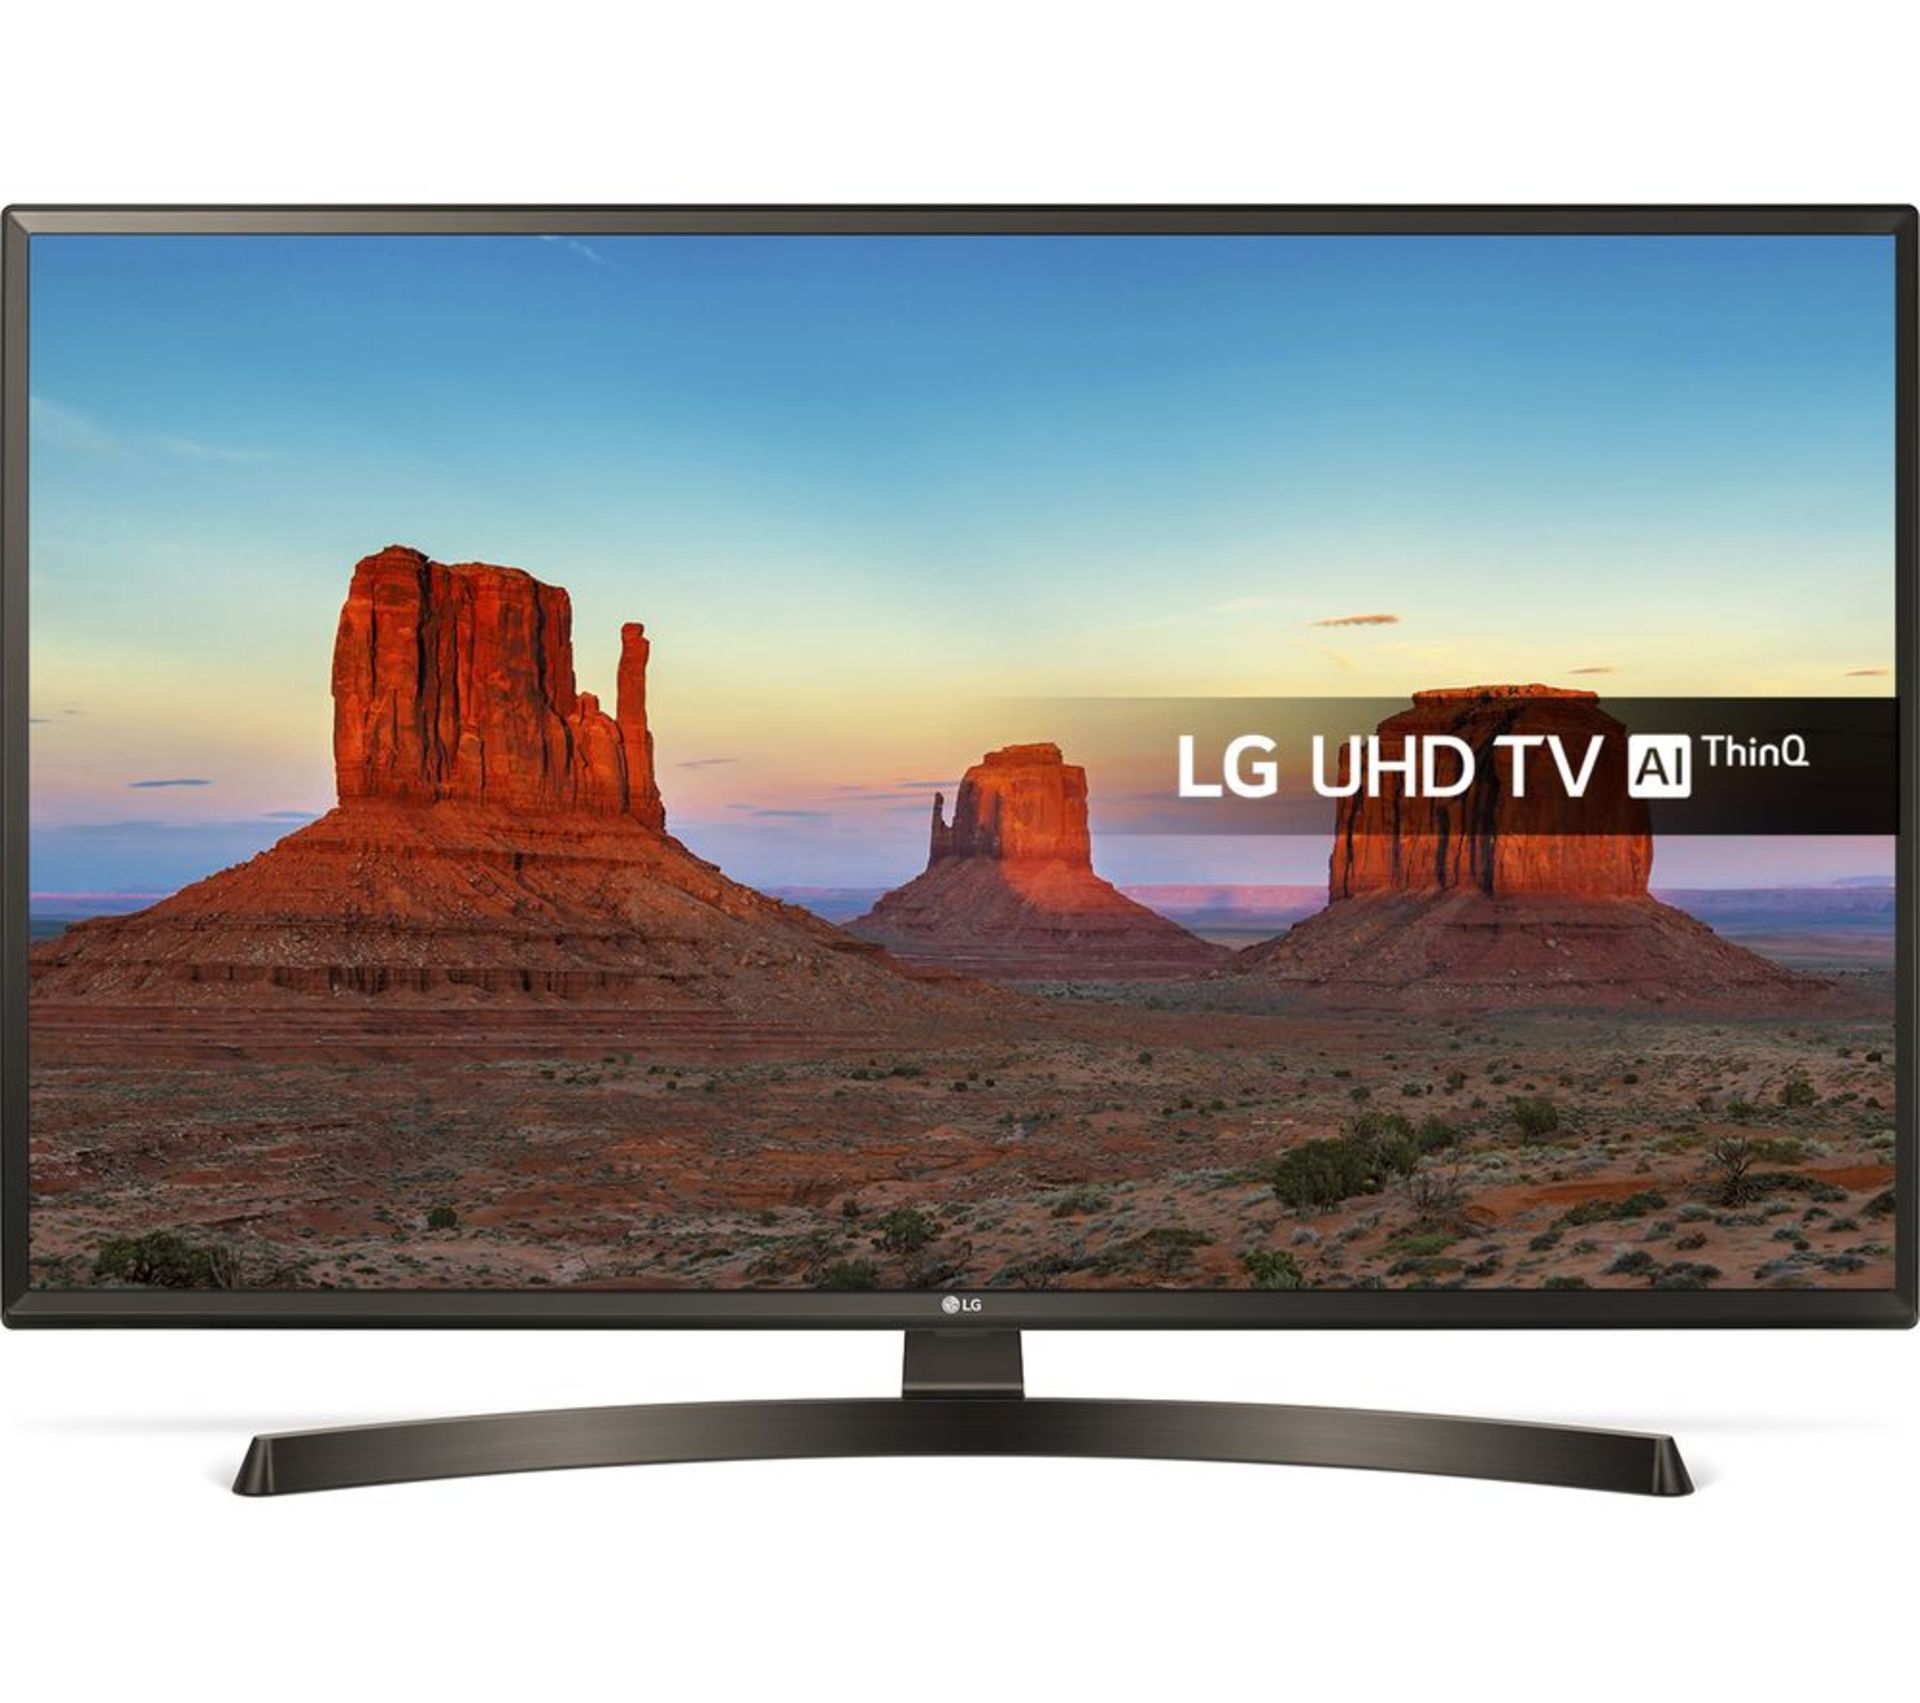 V Grade A LG 55 Inch ACTIVE HDR 4K ULTRA HD LED SMART TV WITH FREEVIEW HD & WEBOS 4.0 & WIFI - AI TV